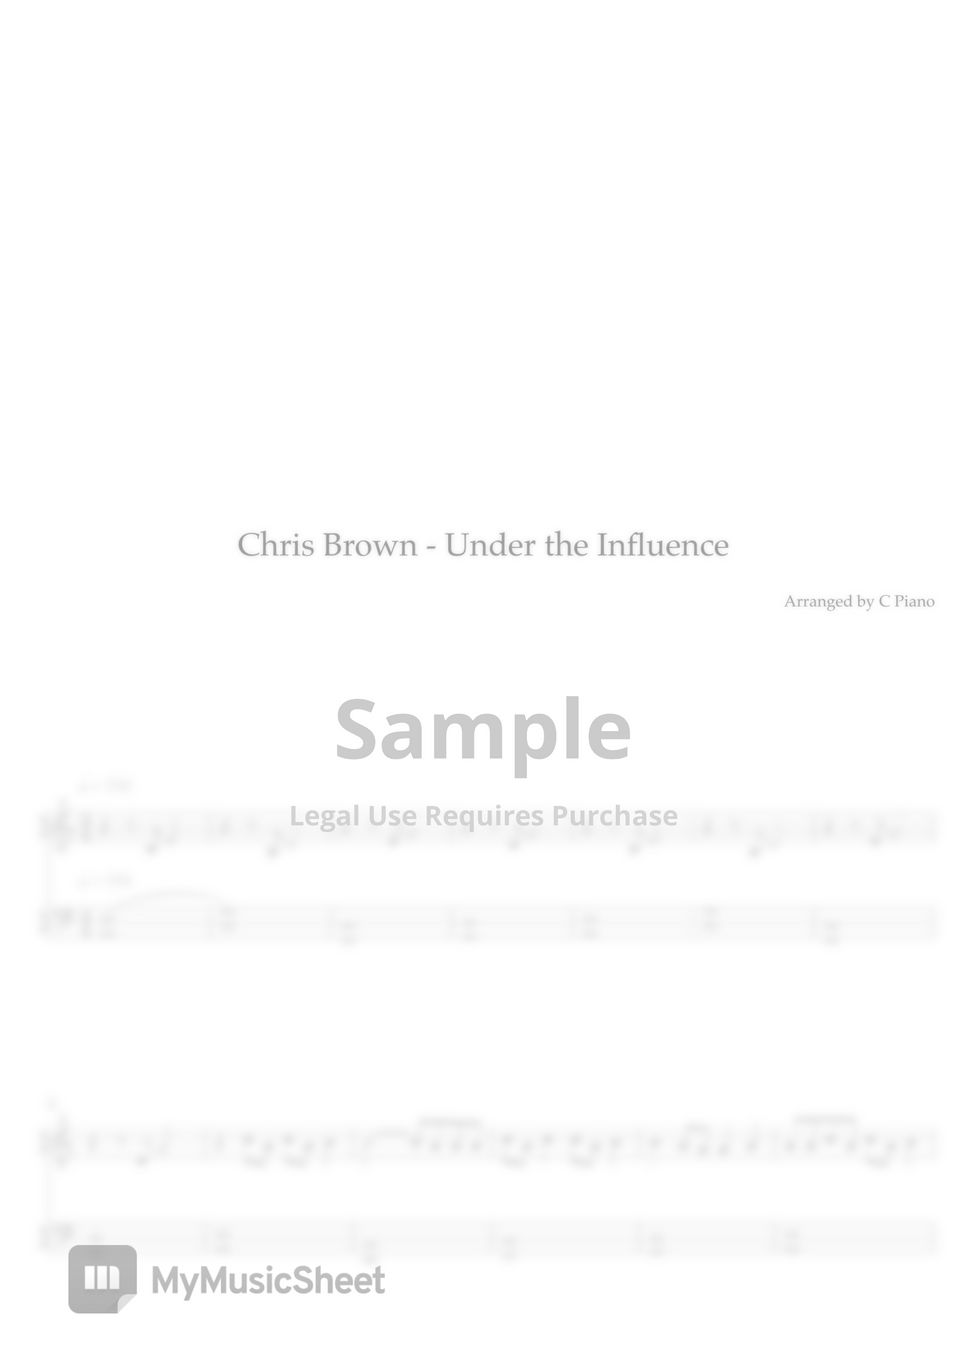 Chris Brown - Under the Influence (Easy Version) by C Piano